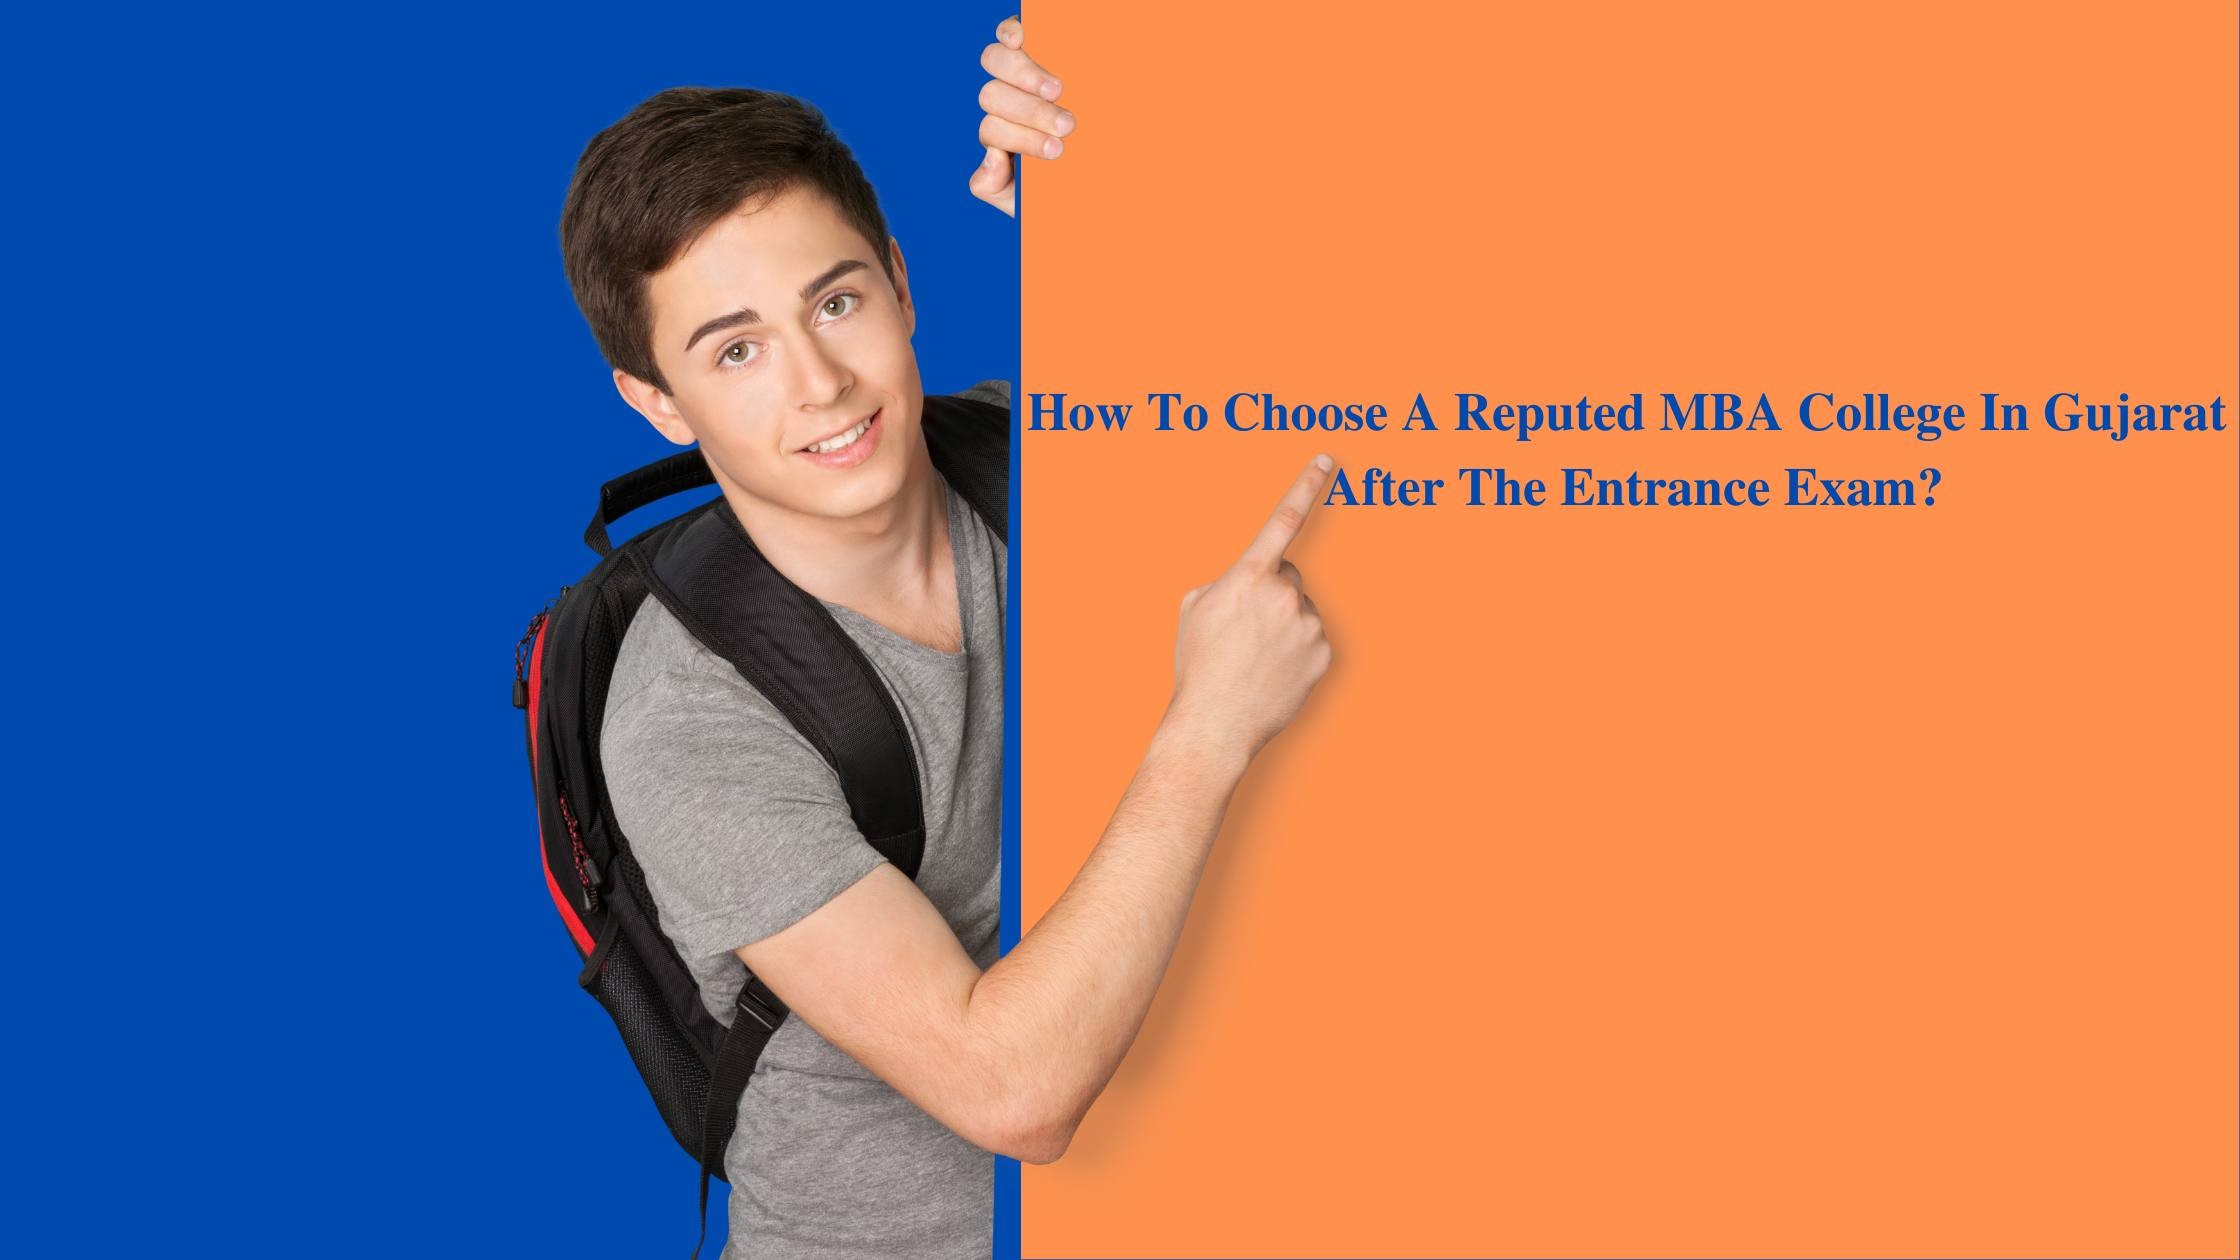 How To Choose A Reputed MBA College In Gujarat After The Entrance Exam?